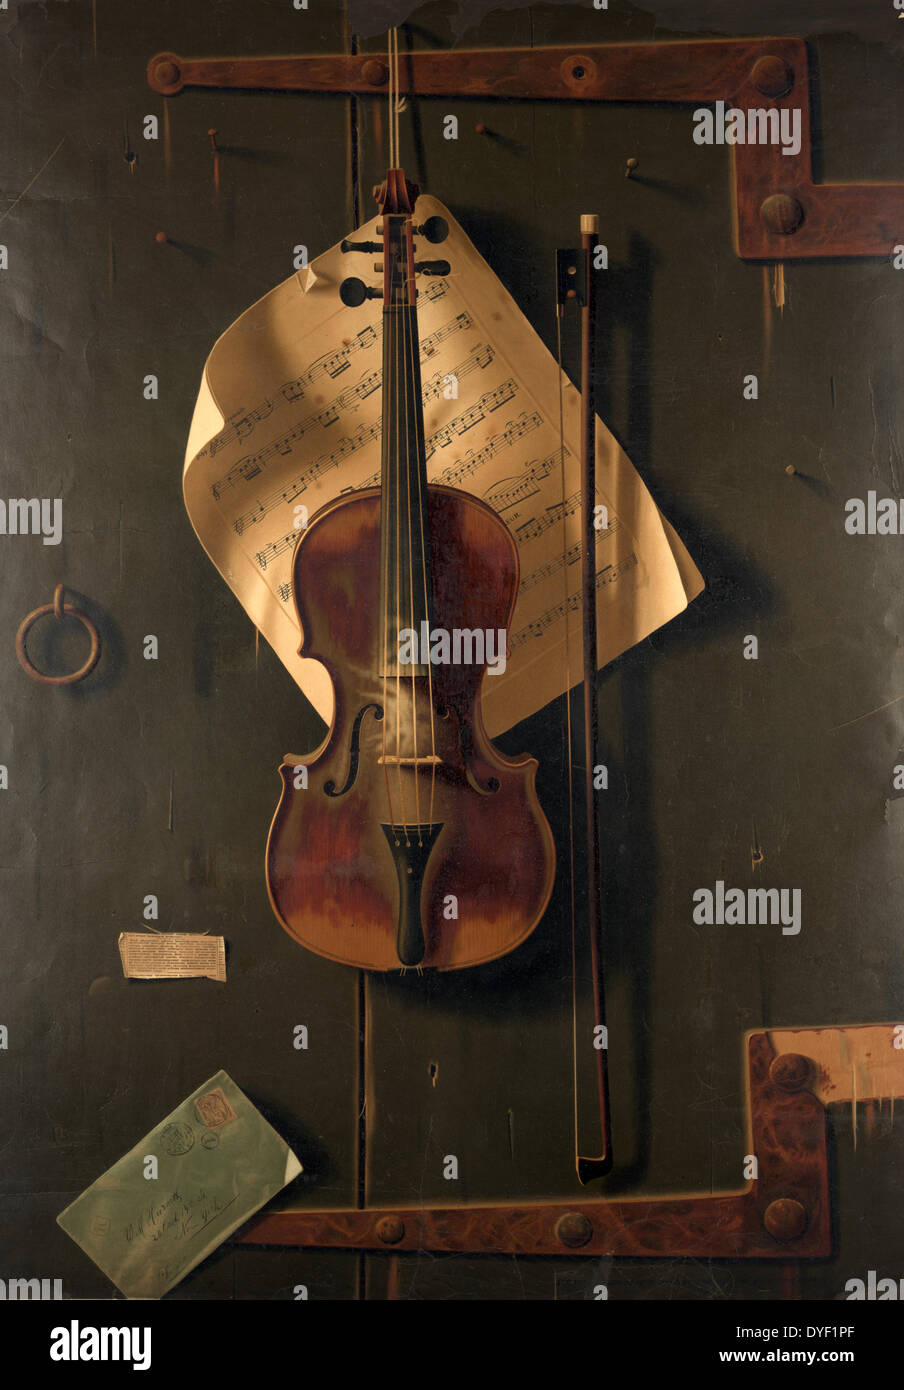 The Old Violin by F. Tuchfarber of Cincinnati in 1887, is a highly decorative subject with it's tromp l'oeil subject of a violin backed by sheet music. The violin is artfully arranged with a bow and letter. The top and bottom have iron hinges which have been incorporated into the trompe l’oeil frame Stock Photo